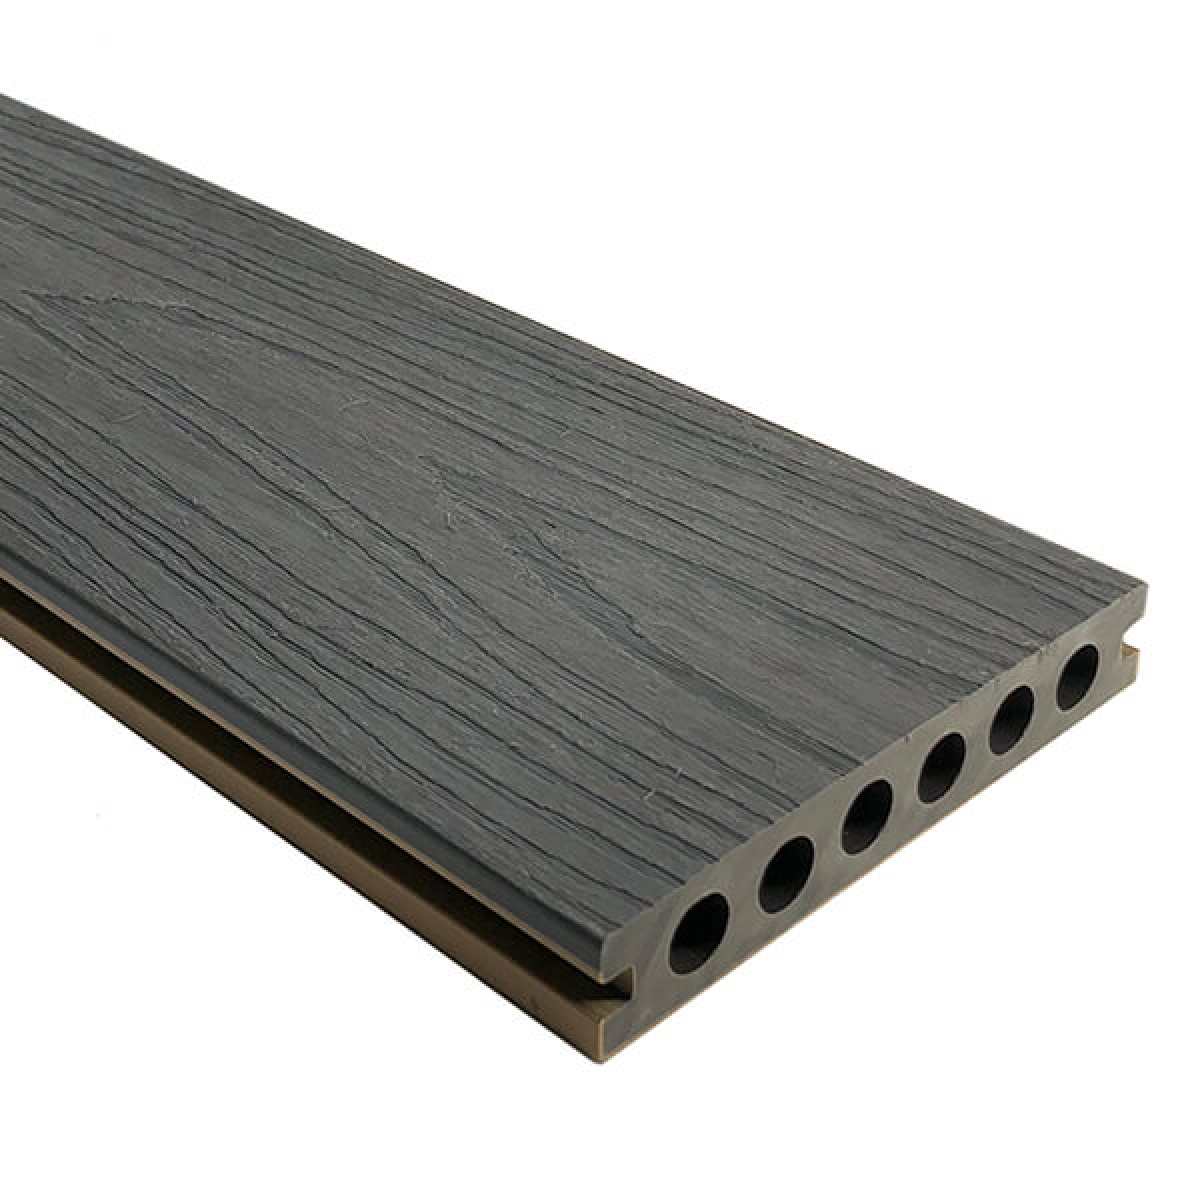 hd deck dual slate angle Image by Websters Timber